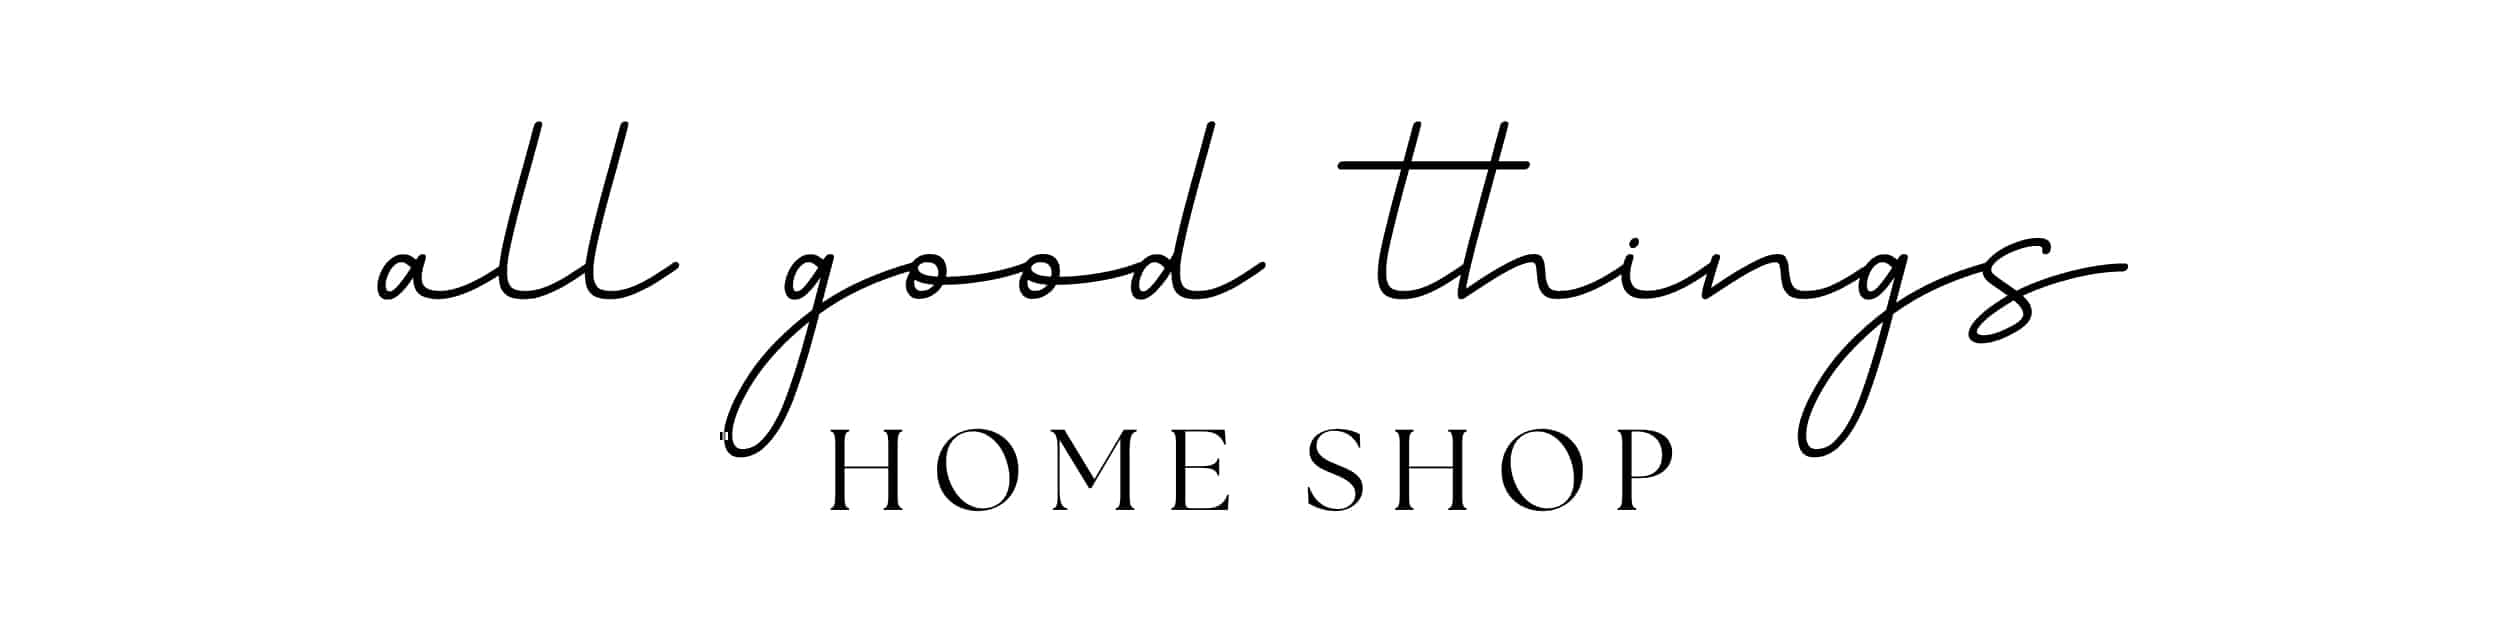 Capsule Decor: All Good Things Home Shop